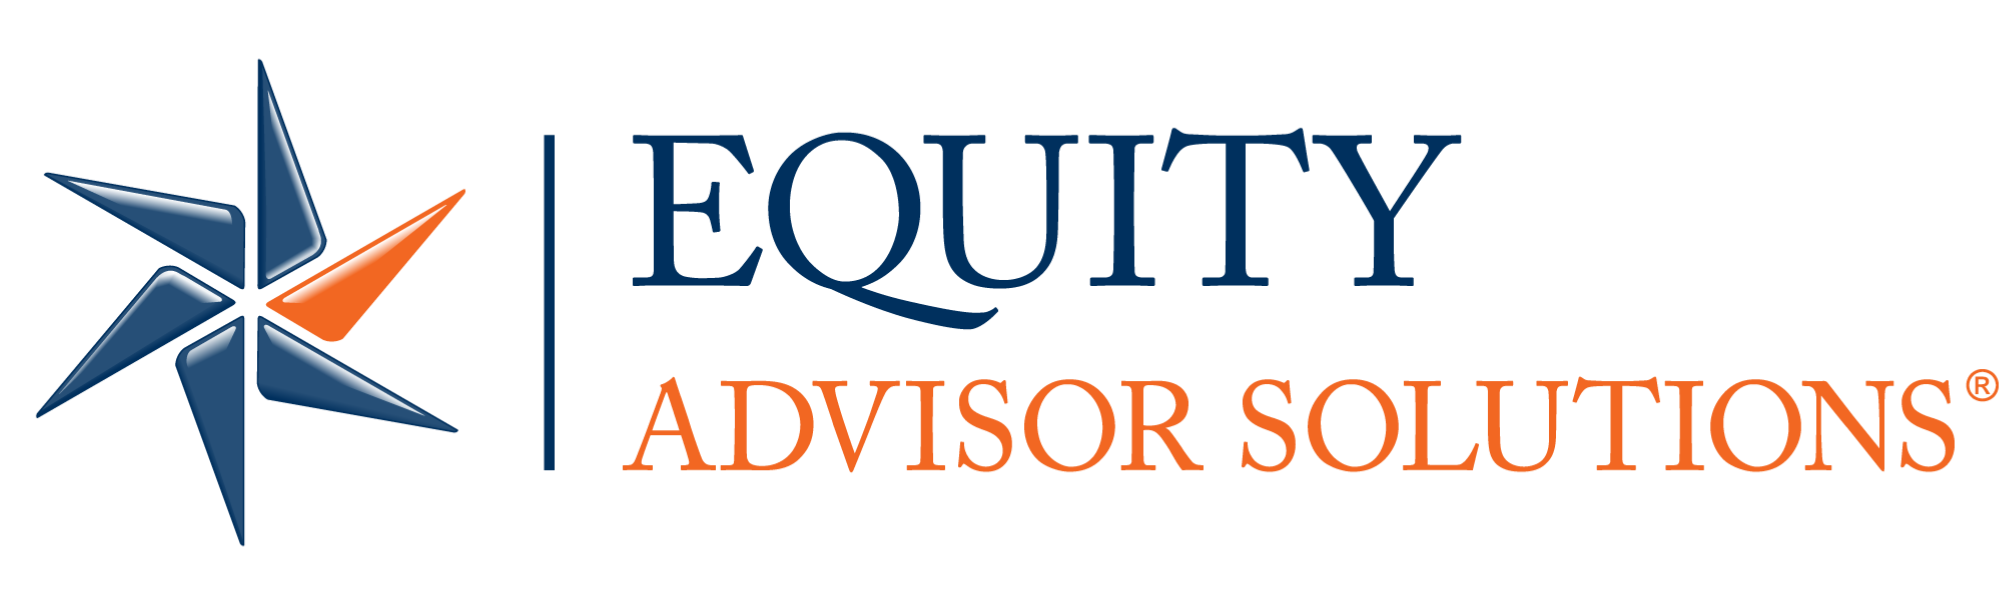 Equity-Advisor-Solutions-png-092118